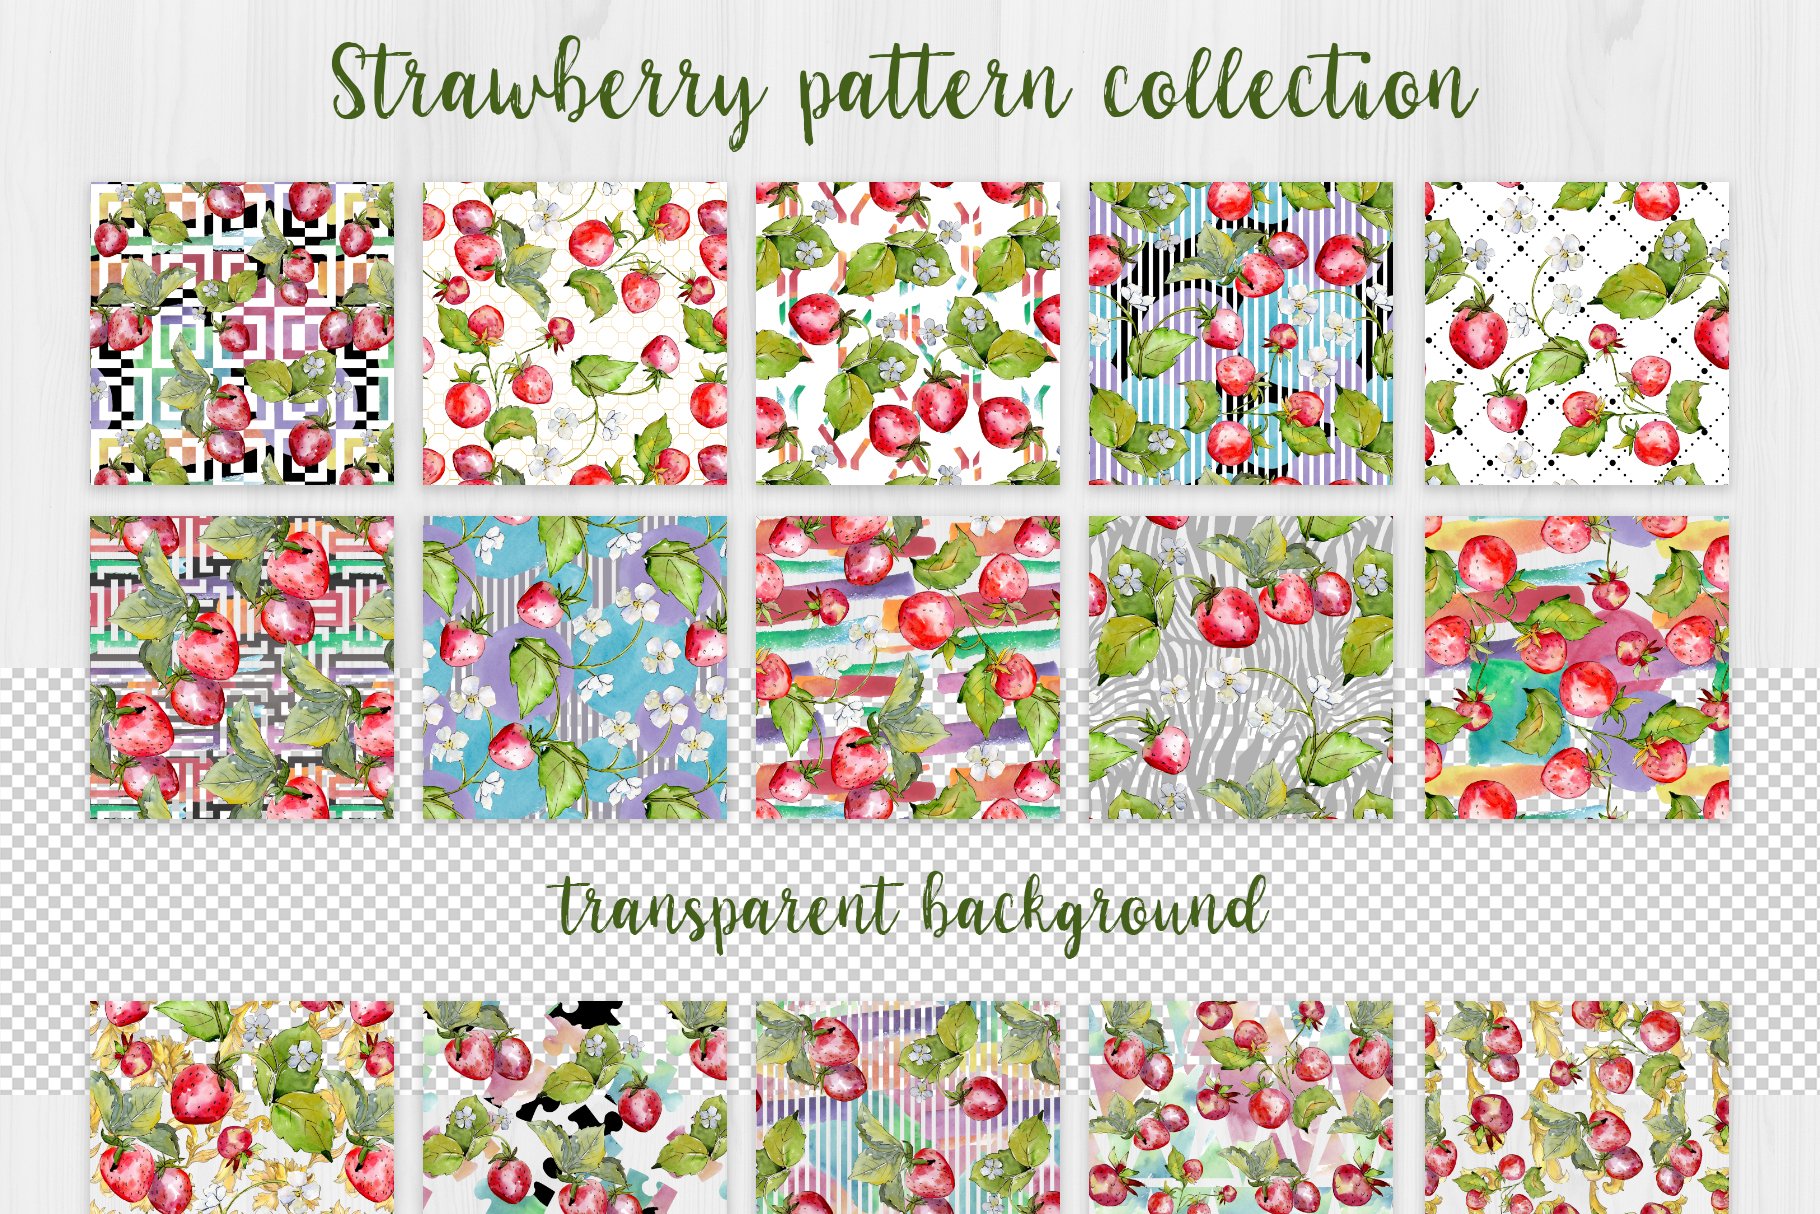 Strawberries patterns collection.